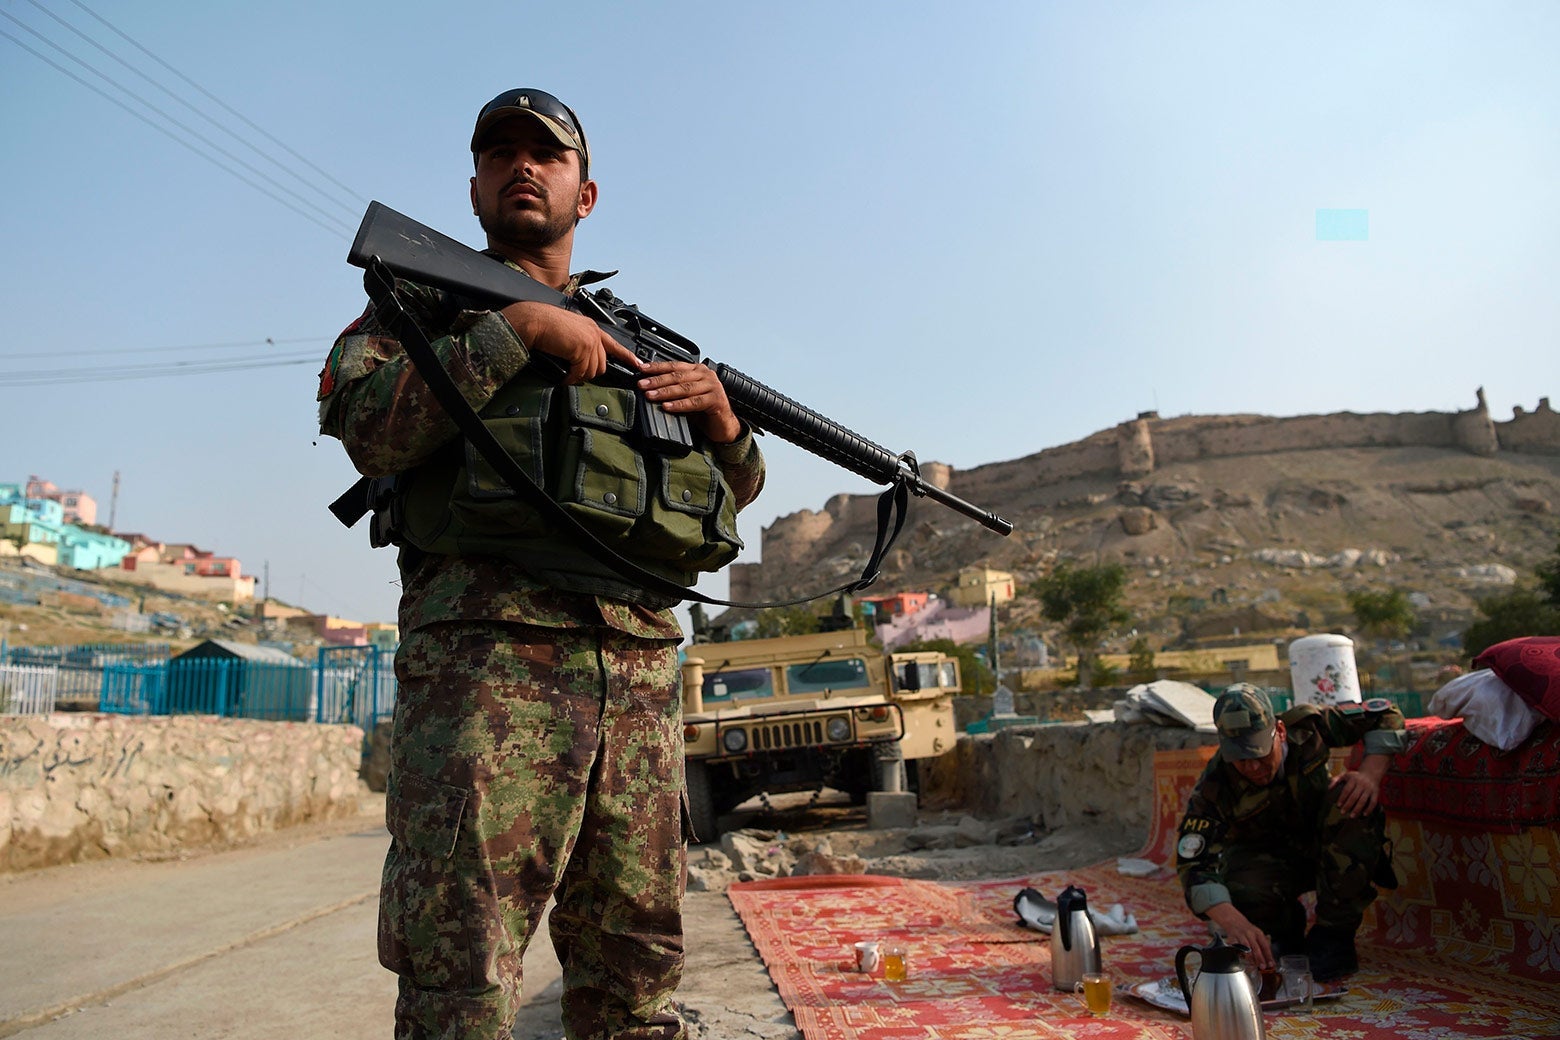 An Afghan soldier stands outside, holding a gun, while another soldier bends down to tend to a tea set on a rug nearby. A military vehicle is in the background.